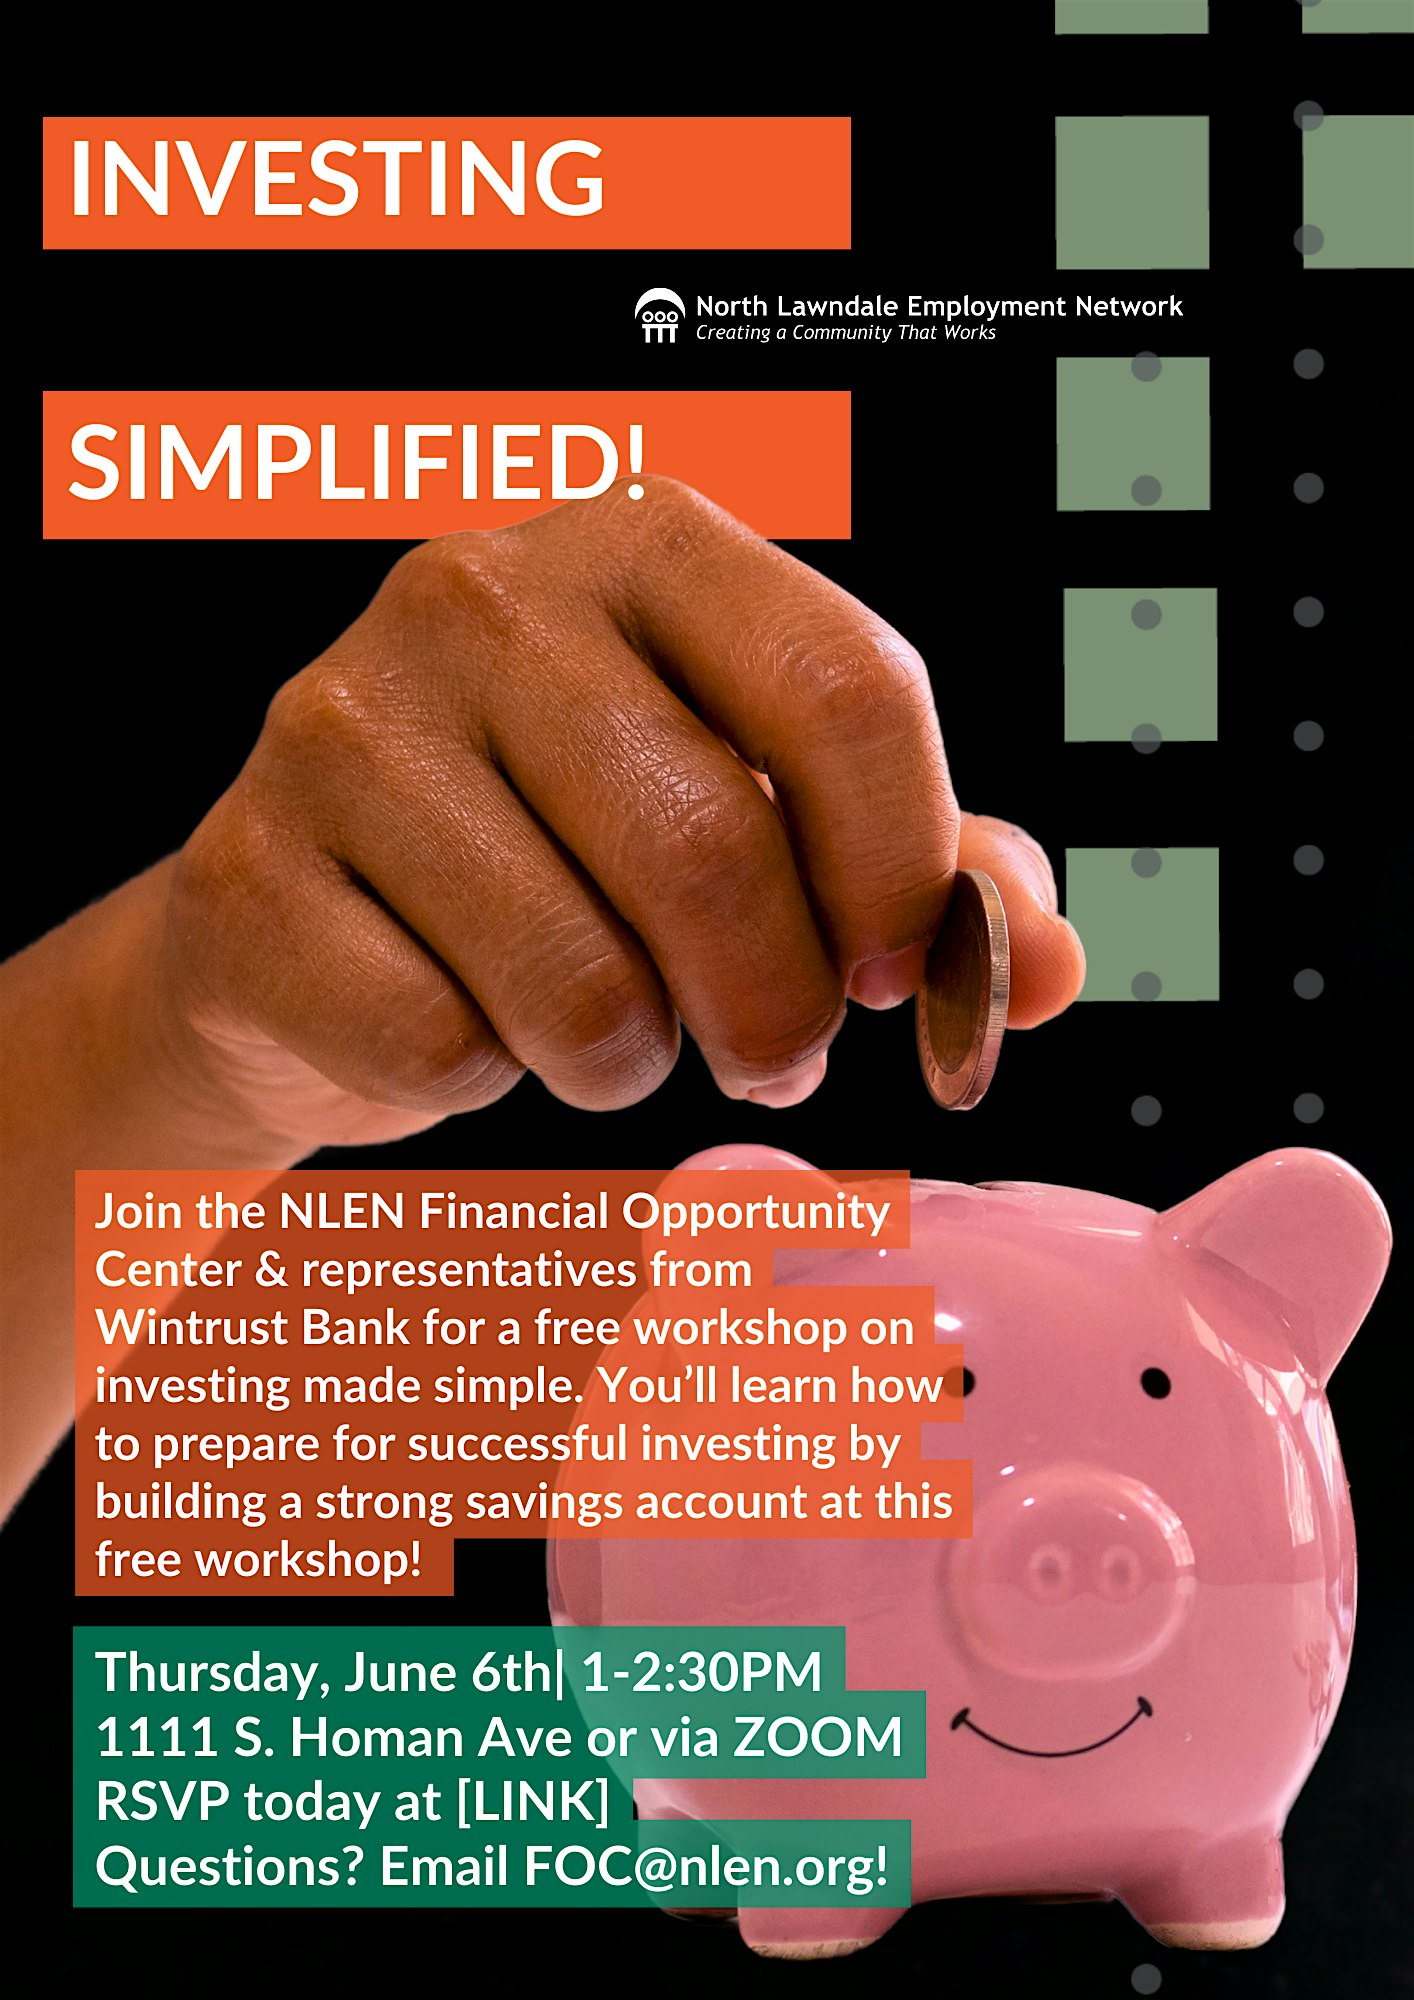 Investing Simplified with NLEN and Wintrust Bank!